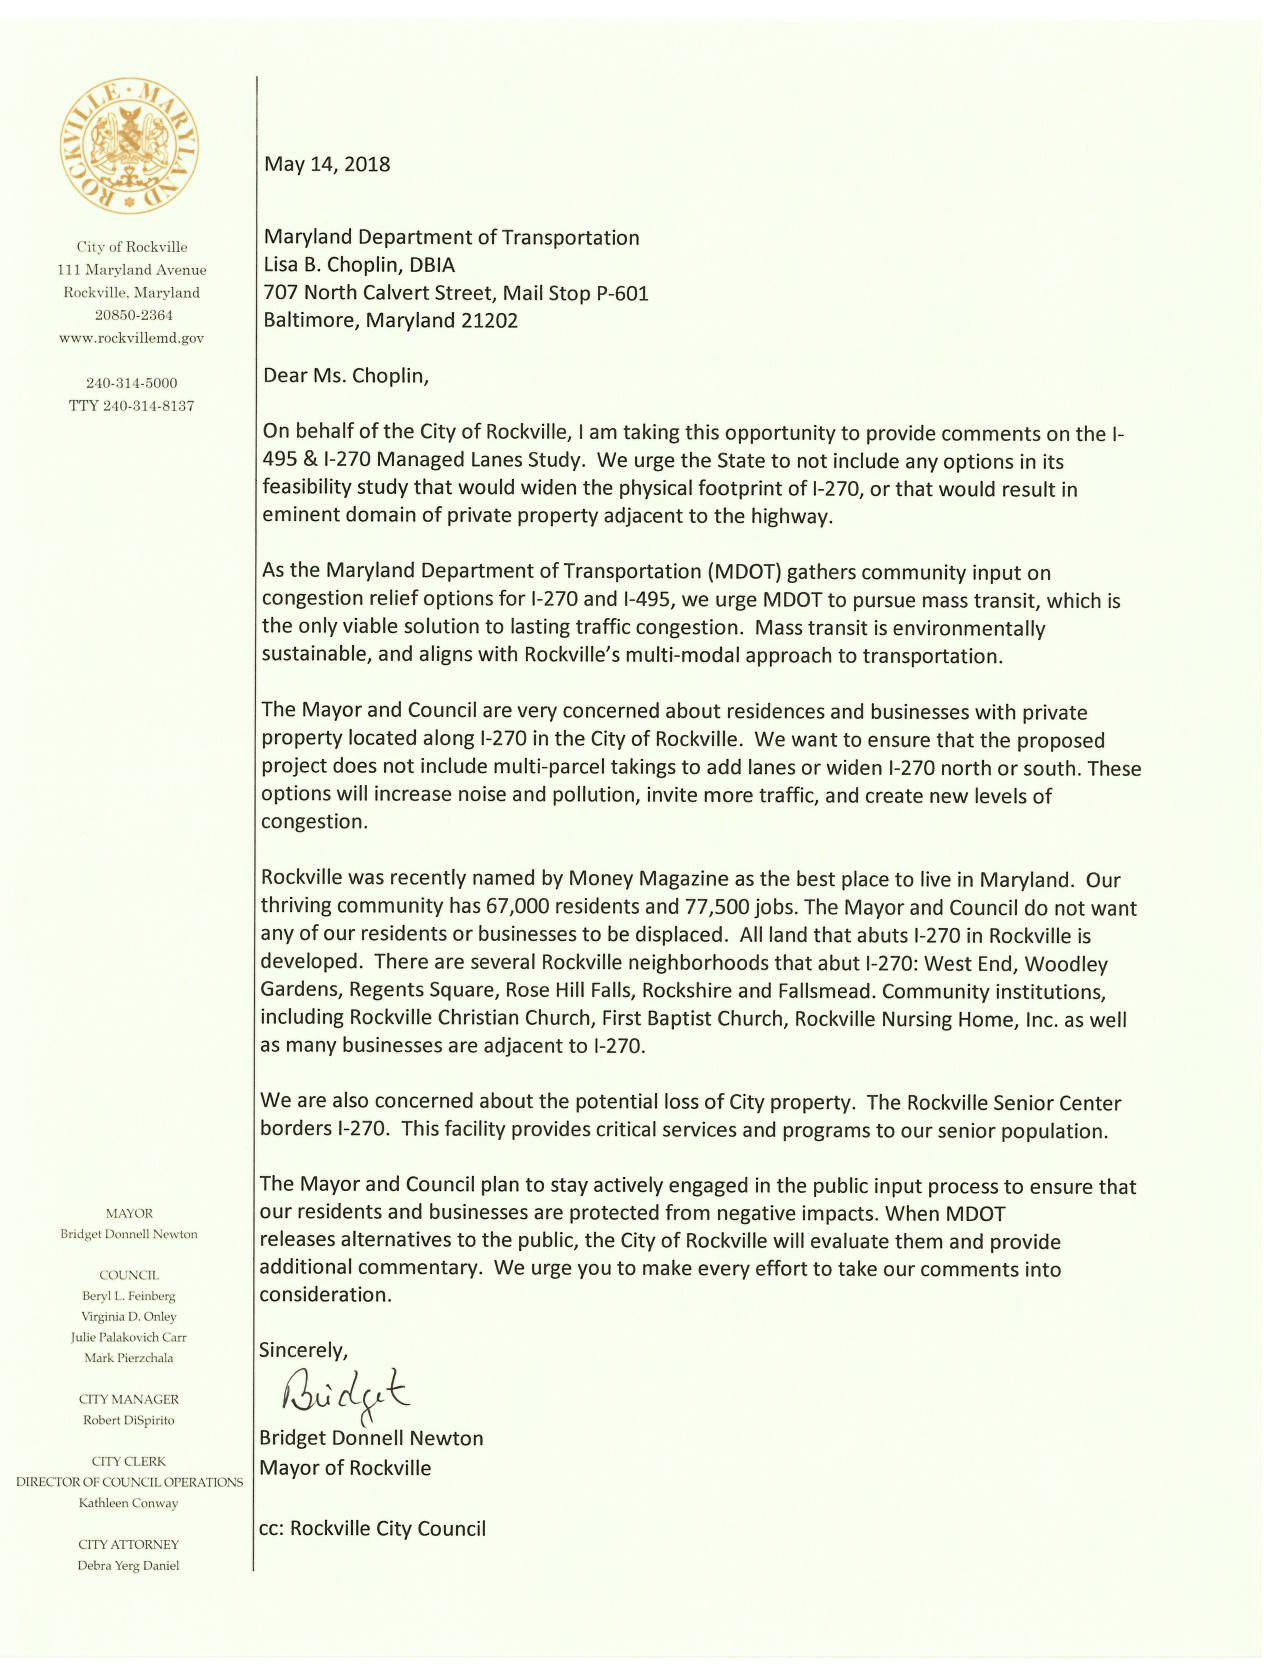 Image of Mayor and Council letter in opposition to widening or adding lanes to I-270 or I-495 as part of the state’s I-495 & I-270 Public-Private Partnership Program.